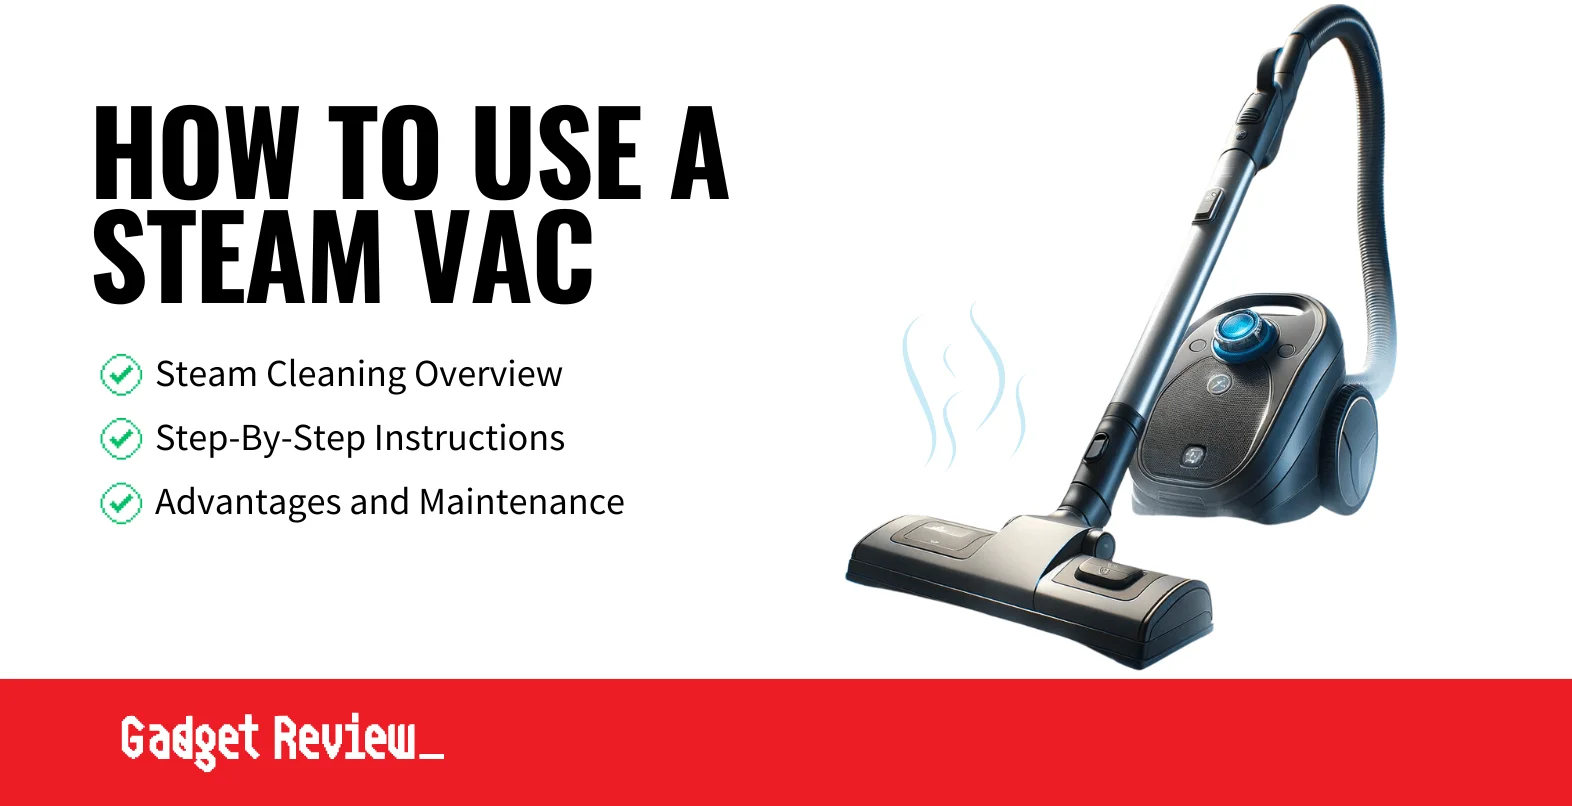 How to Use a Steam Vac